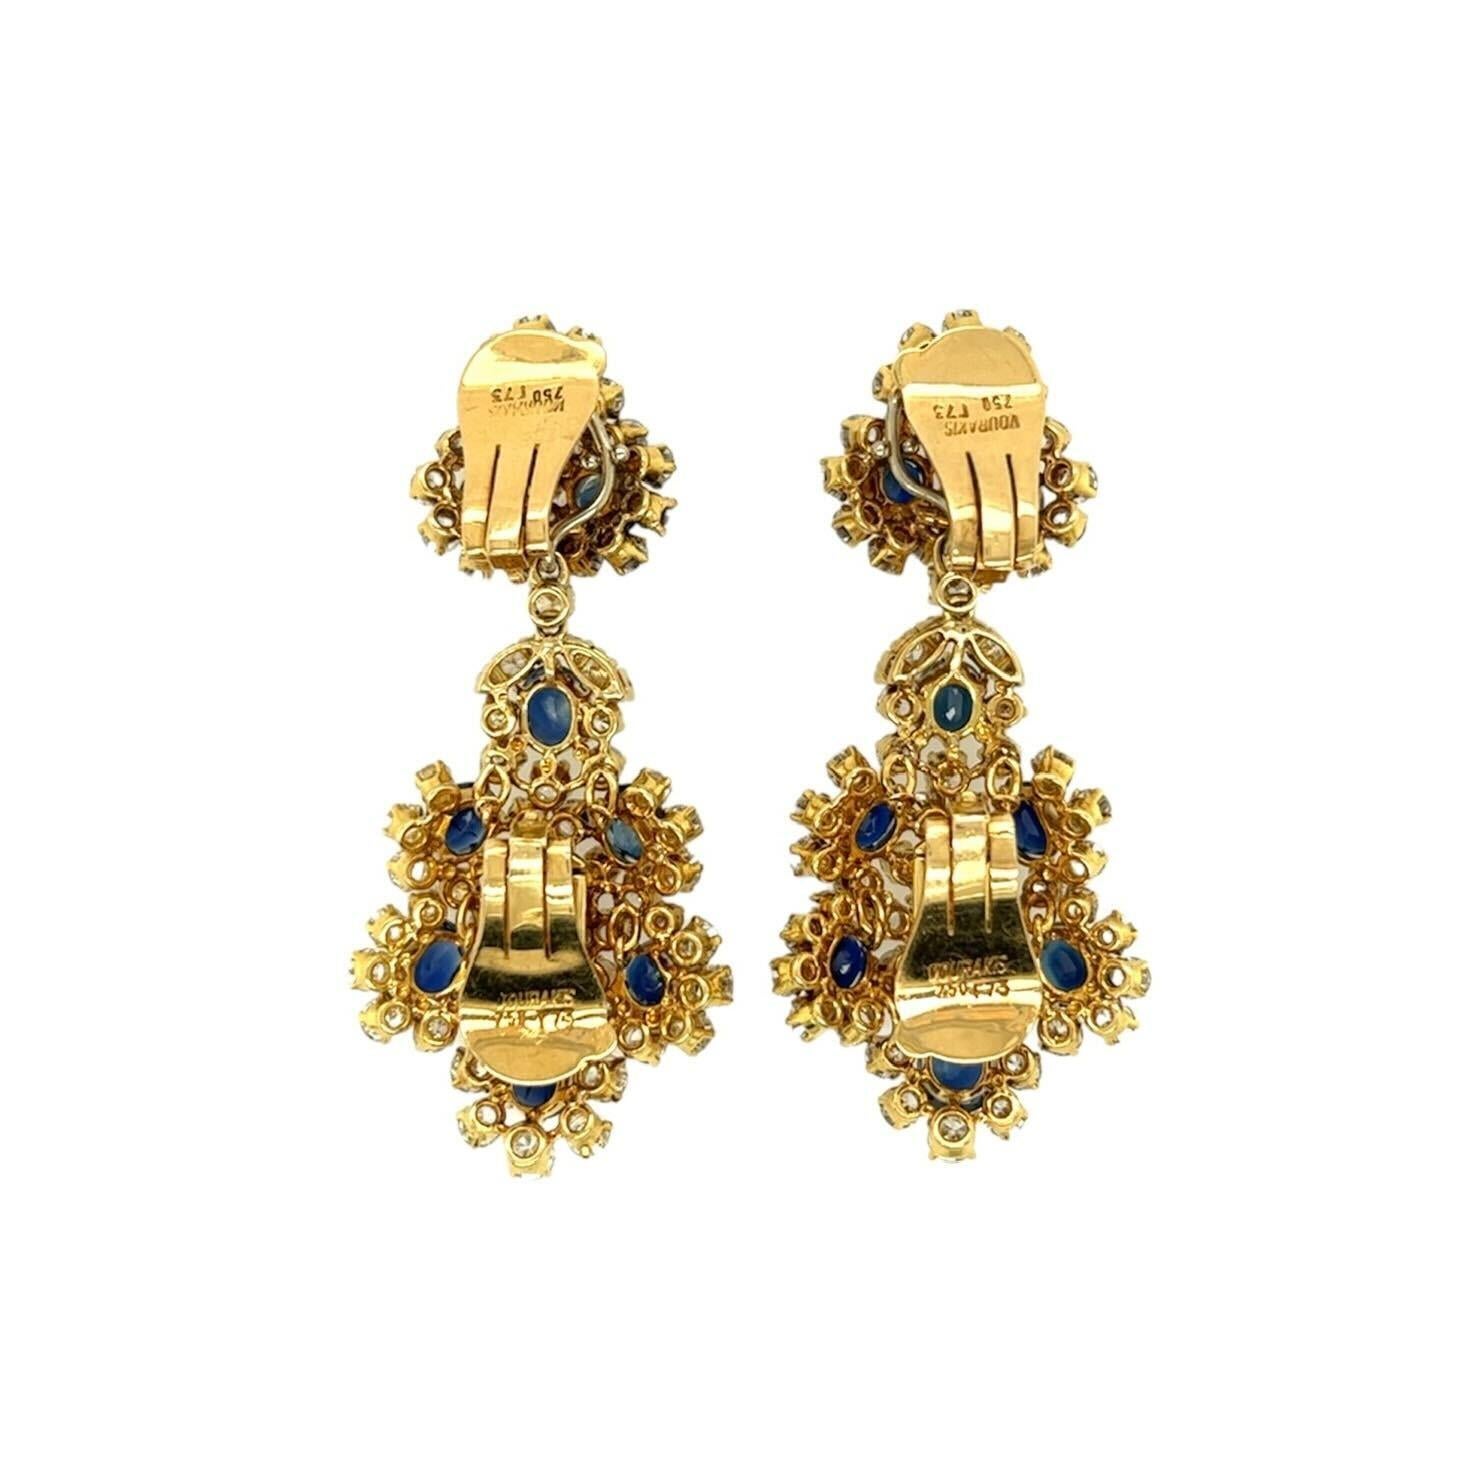 VOURAKIS Yellow Gold, Sapphire and Diamond Earrings In Excellent Condition For Sale In New York, NY